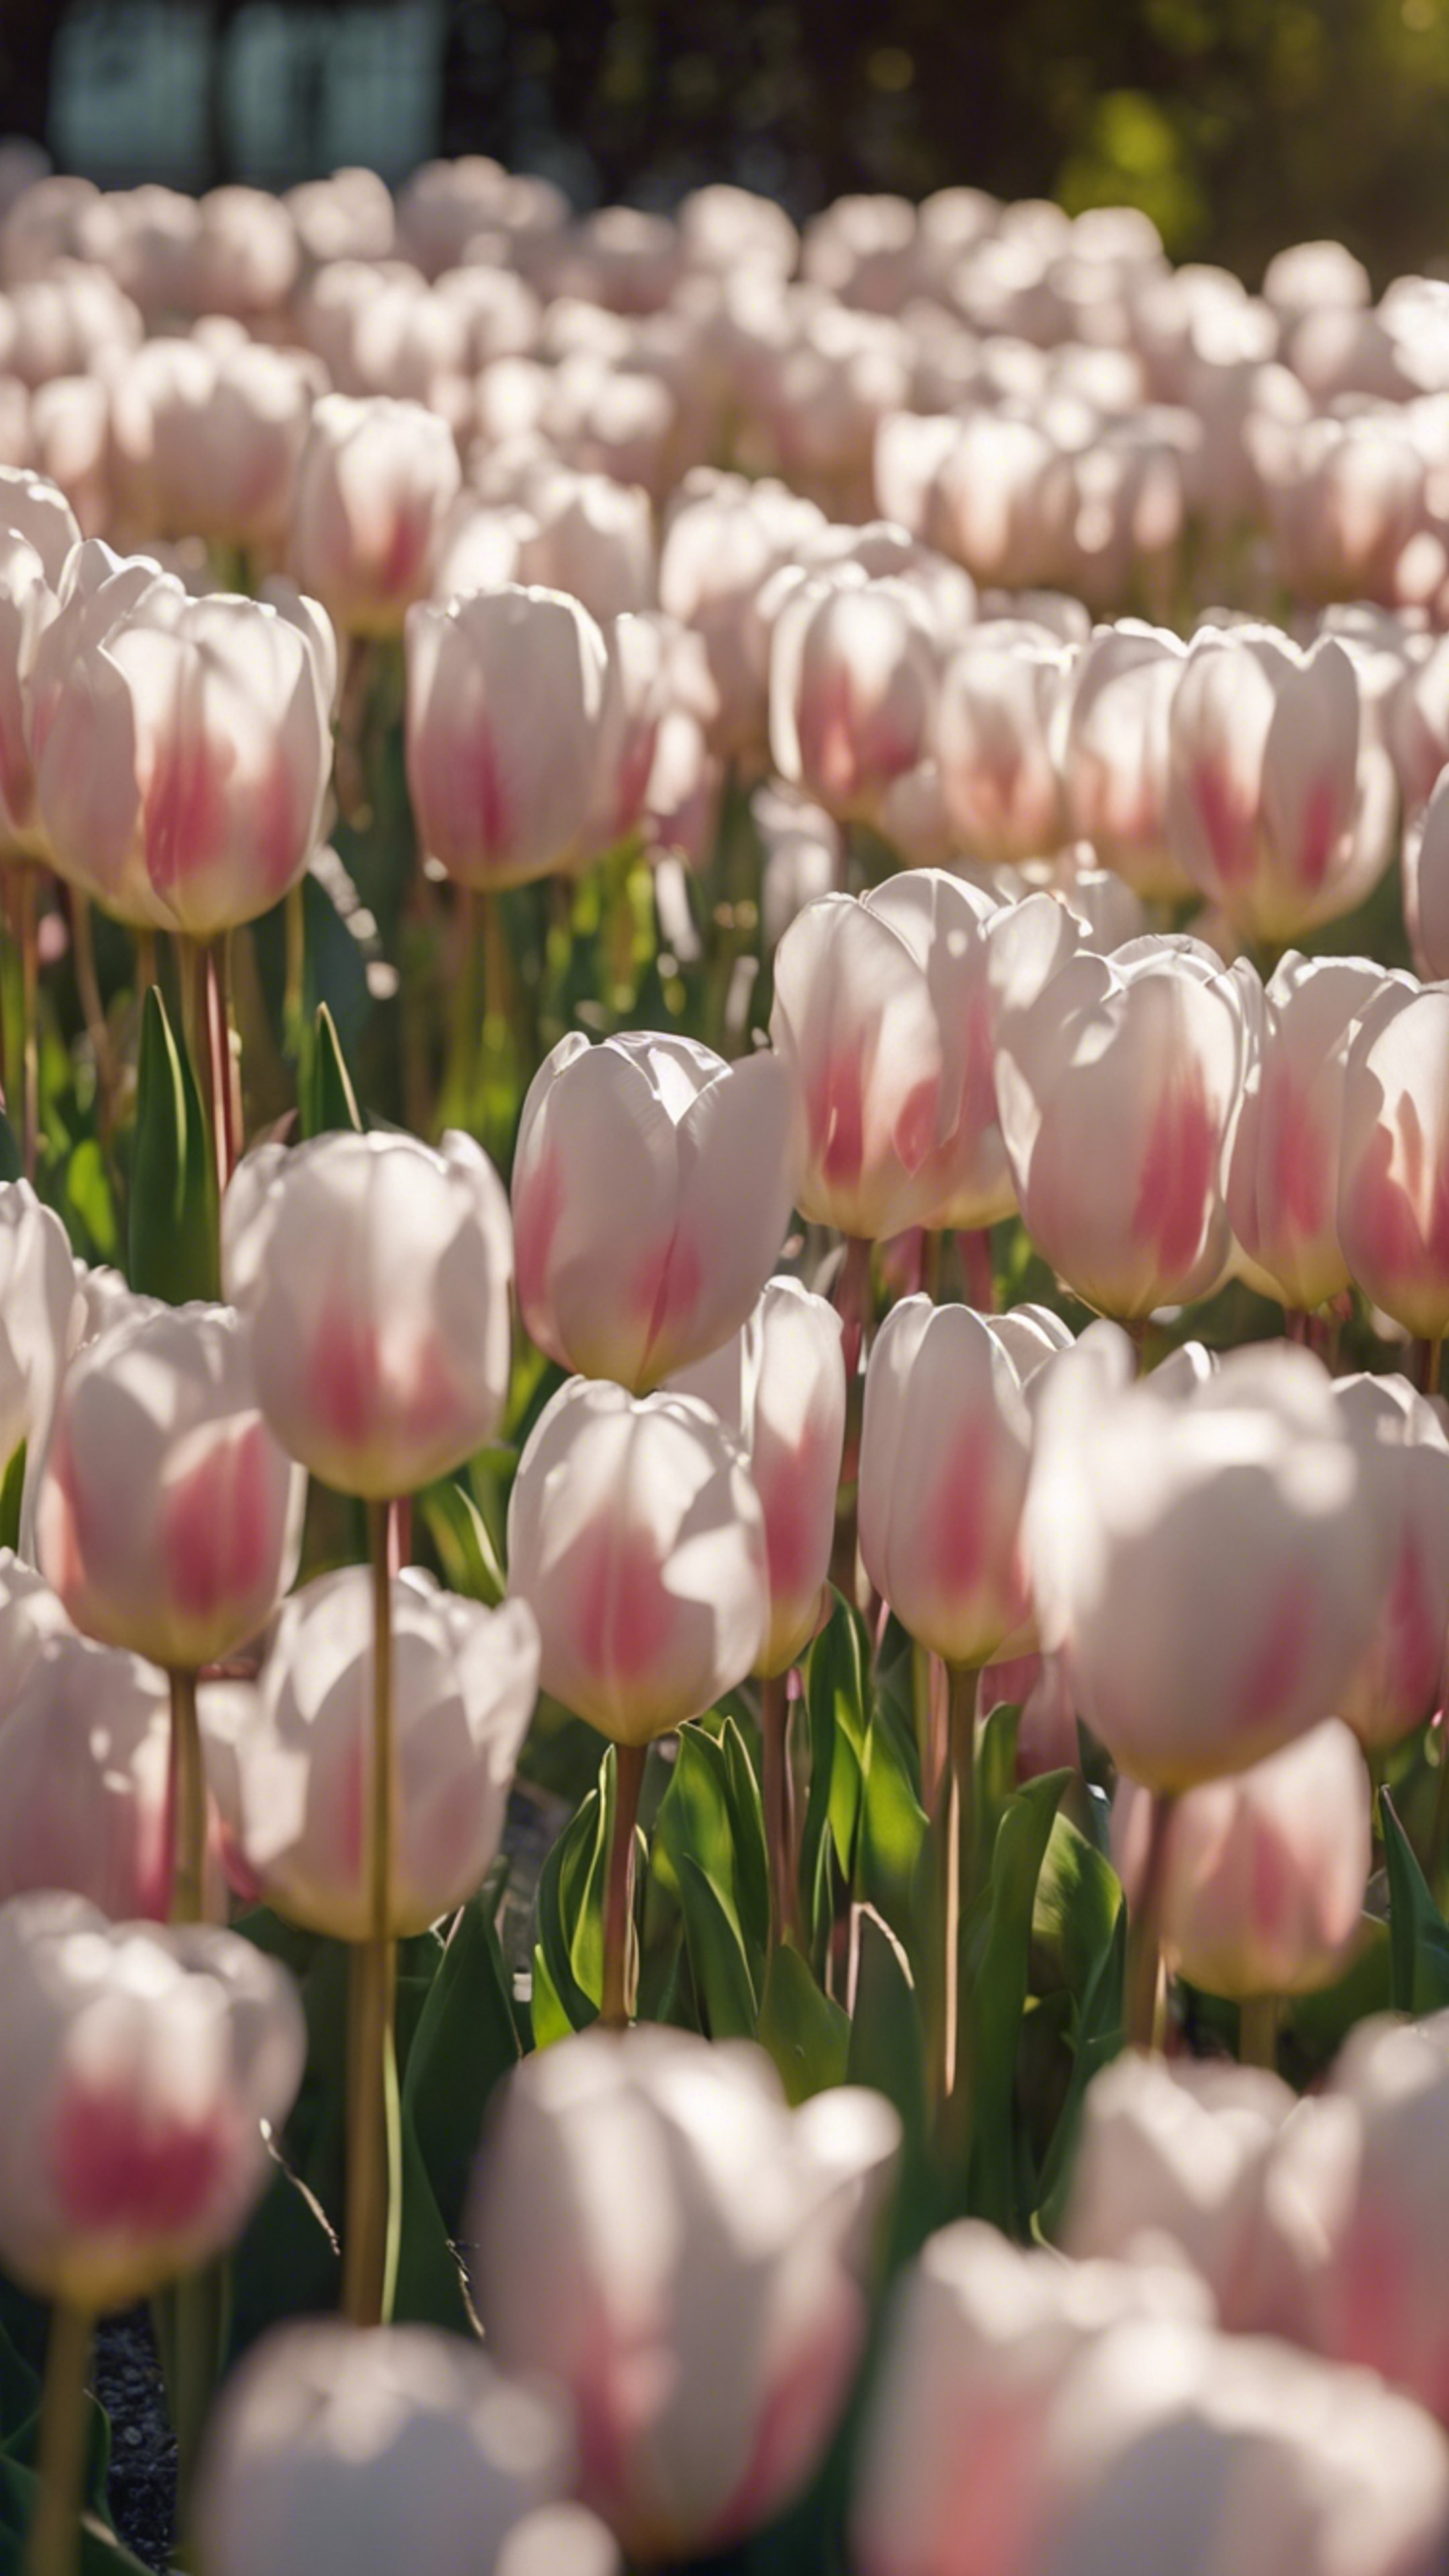 A garden filled with white and pink tulips, shimmering under the soft glow of a morning sun. Ταπετσαρία[0043435f230e41f4a509]